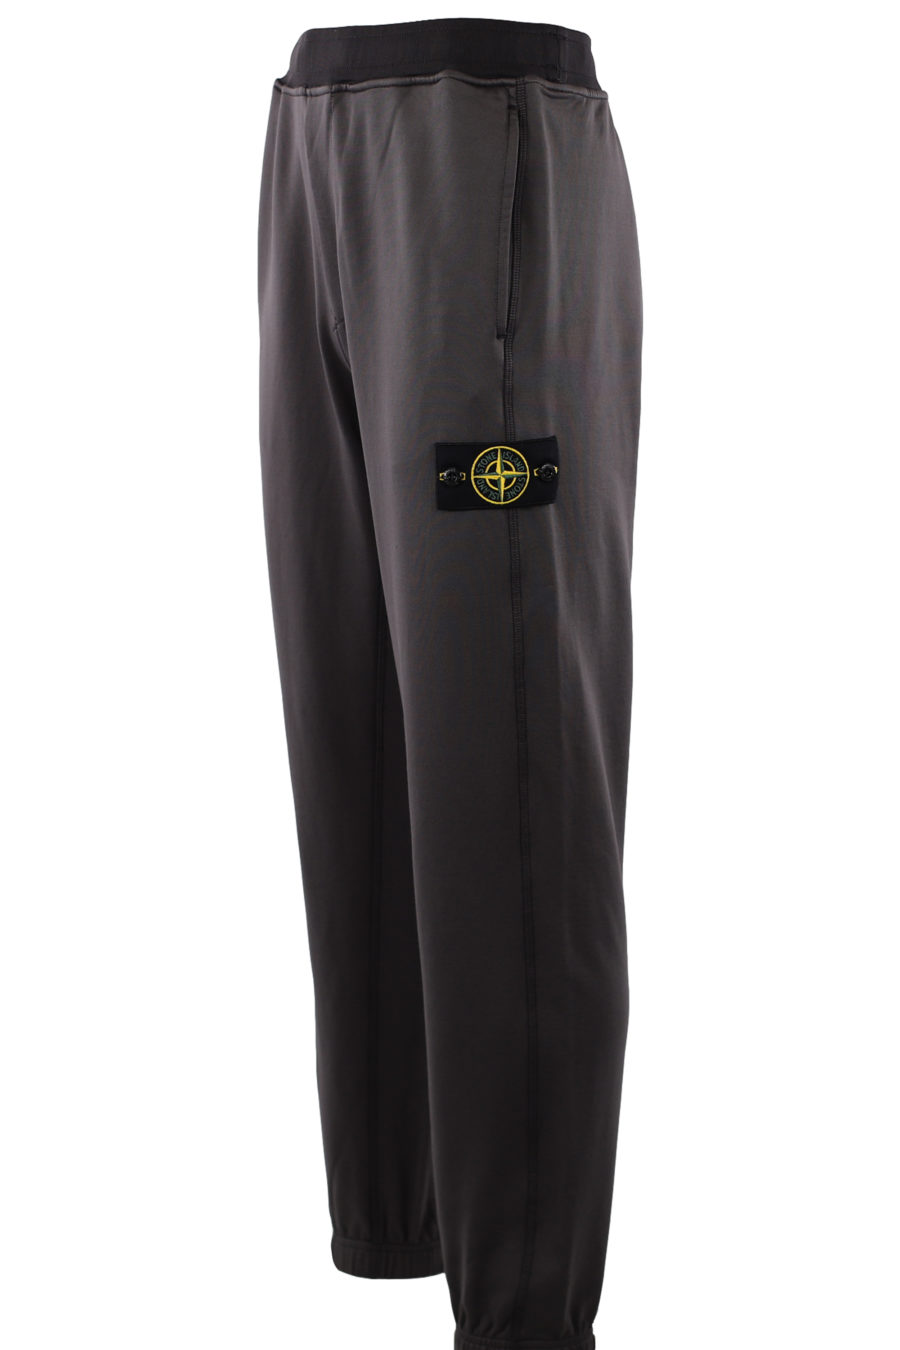 Metallic grey trousers with logo patch - IMG 9172